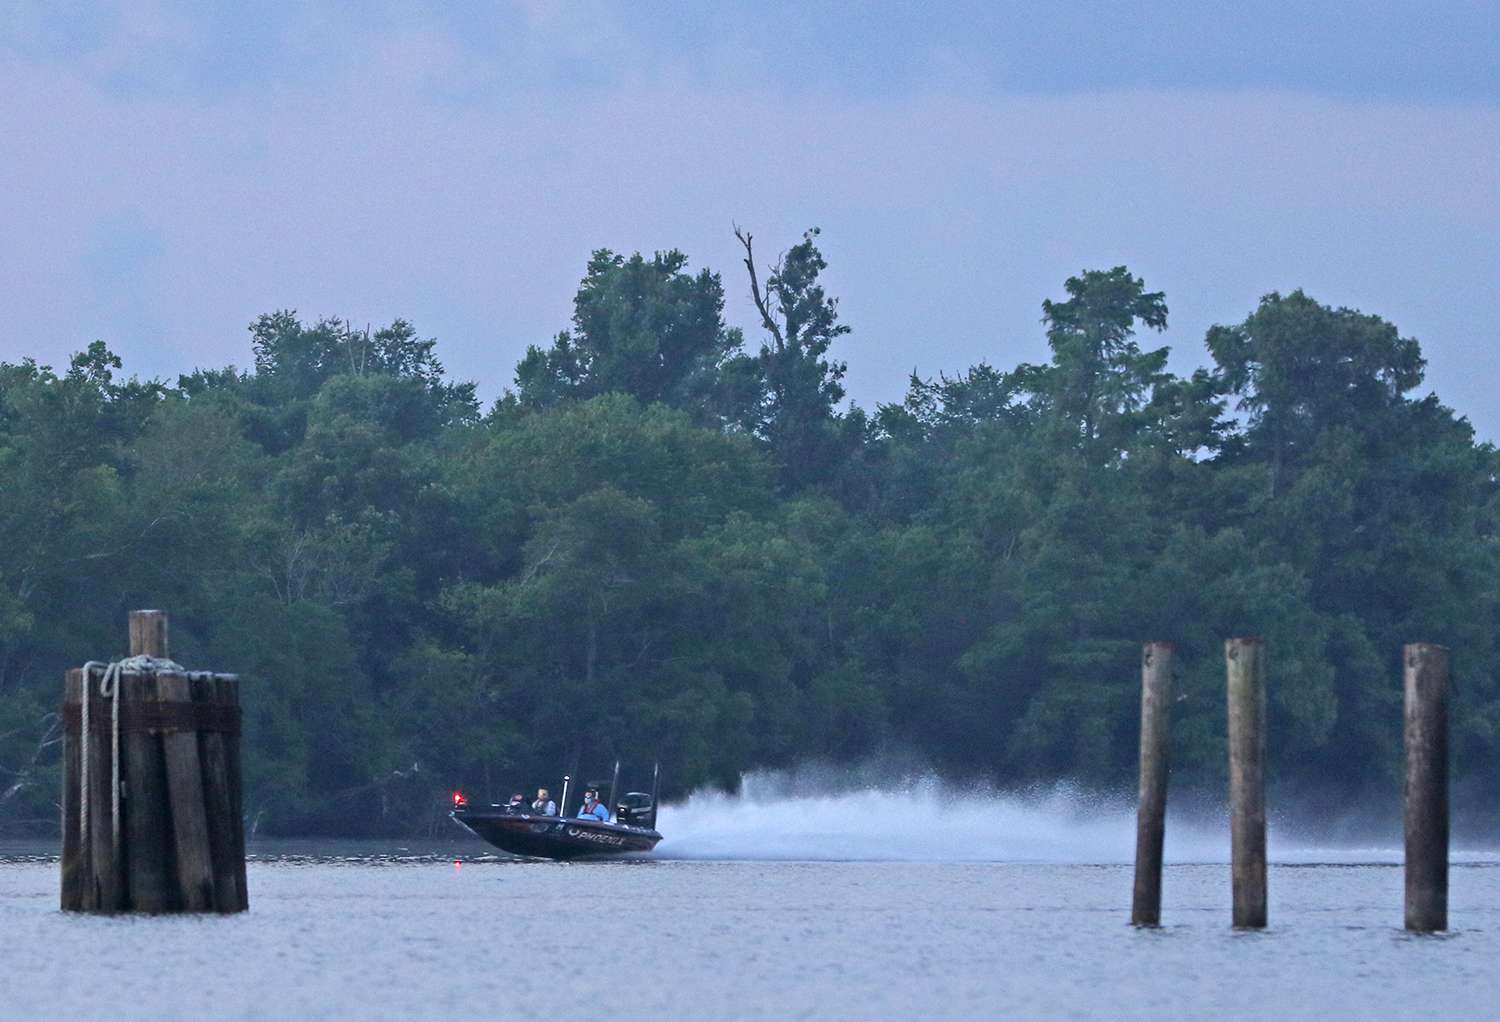 Follow Greg Hackney as he widens his lead on Day 3 of the 2018 Bass Pro Shops Bassmaster Elite at Sabine River presented by Econo Lodge.